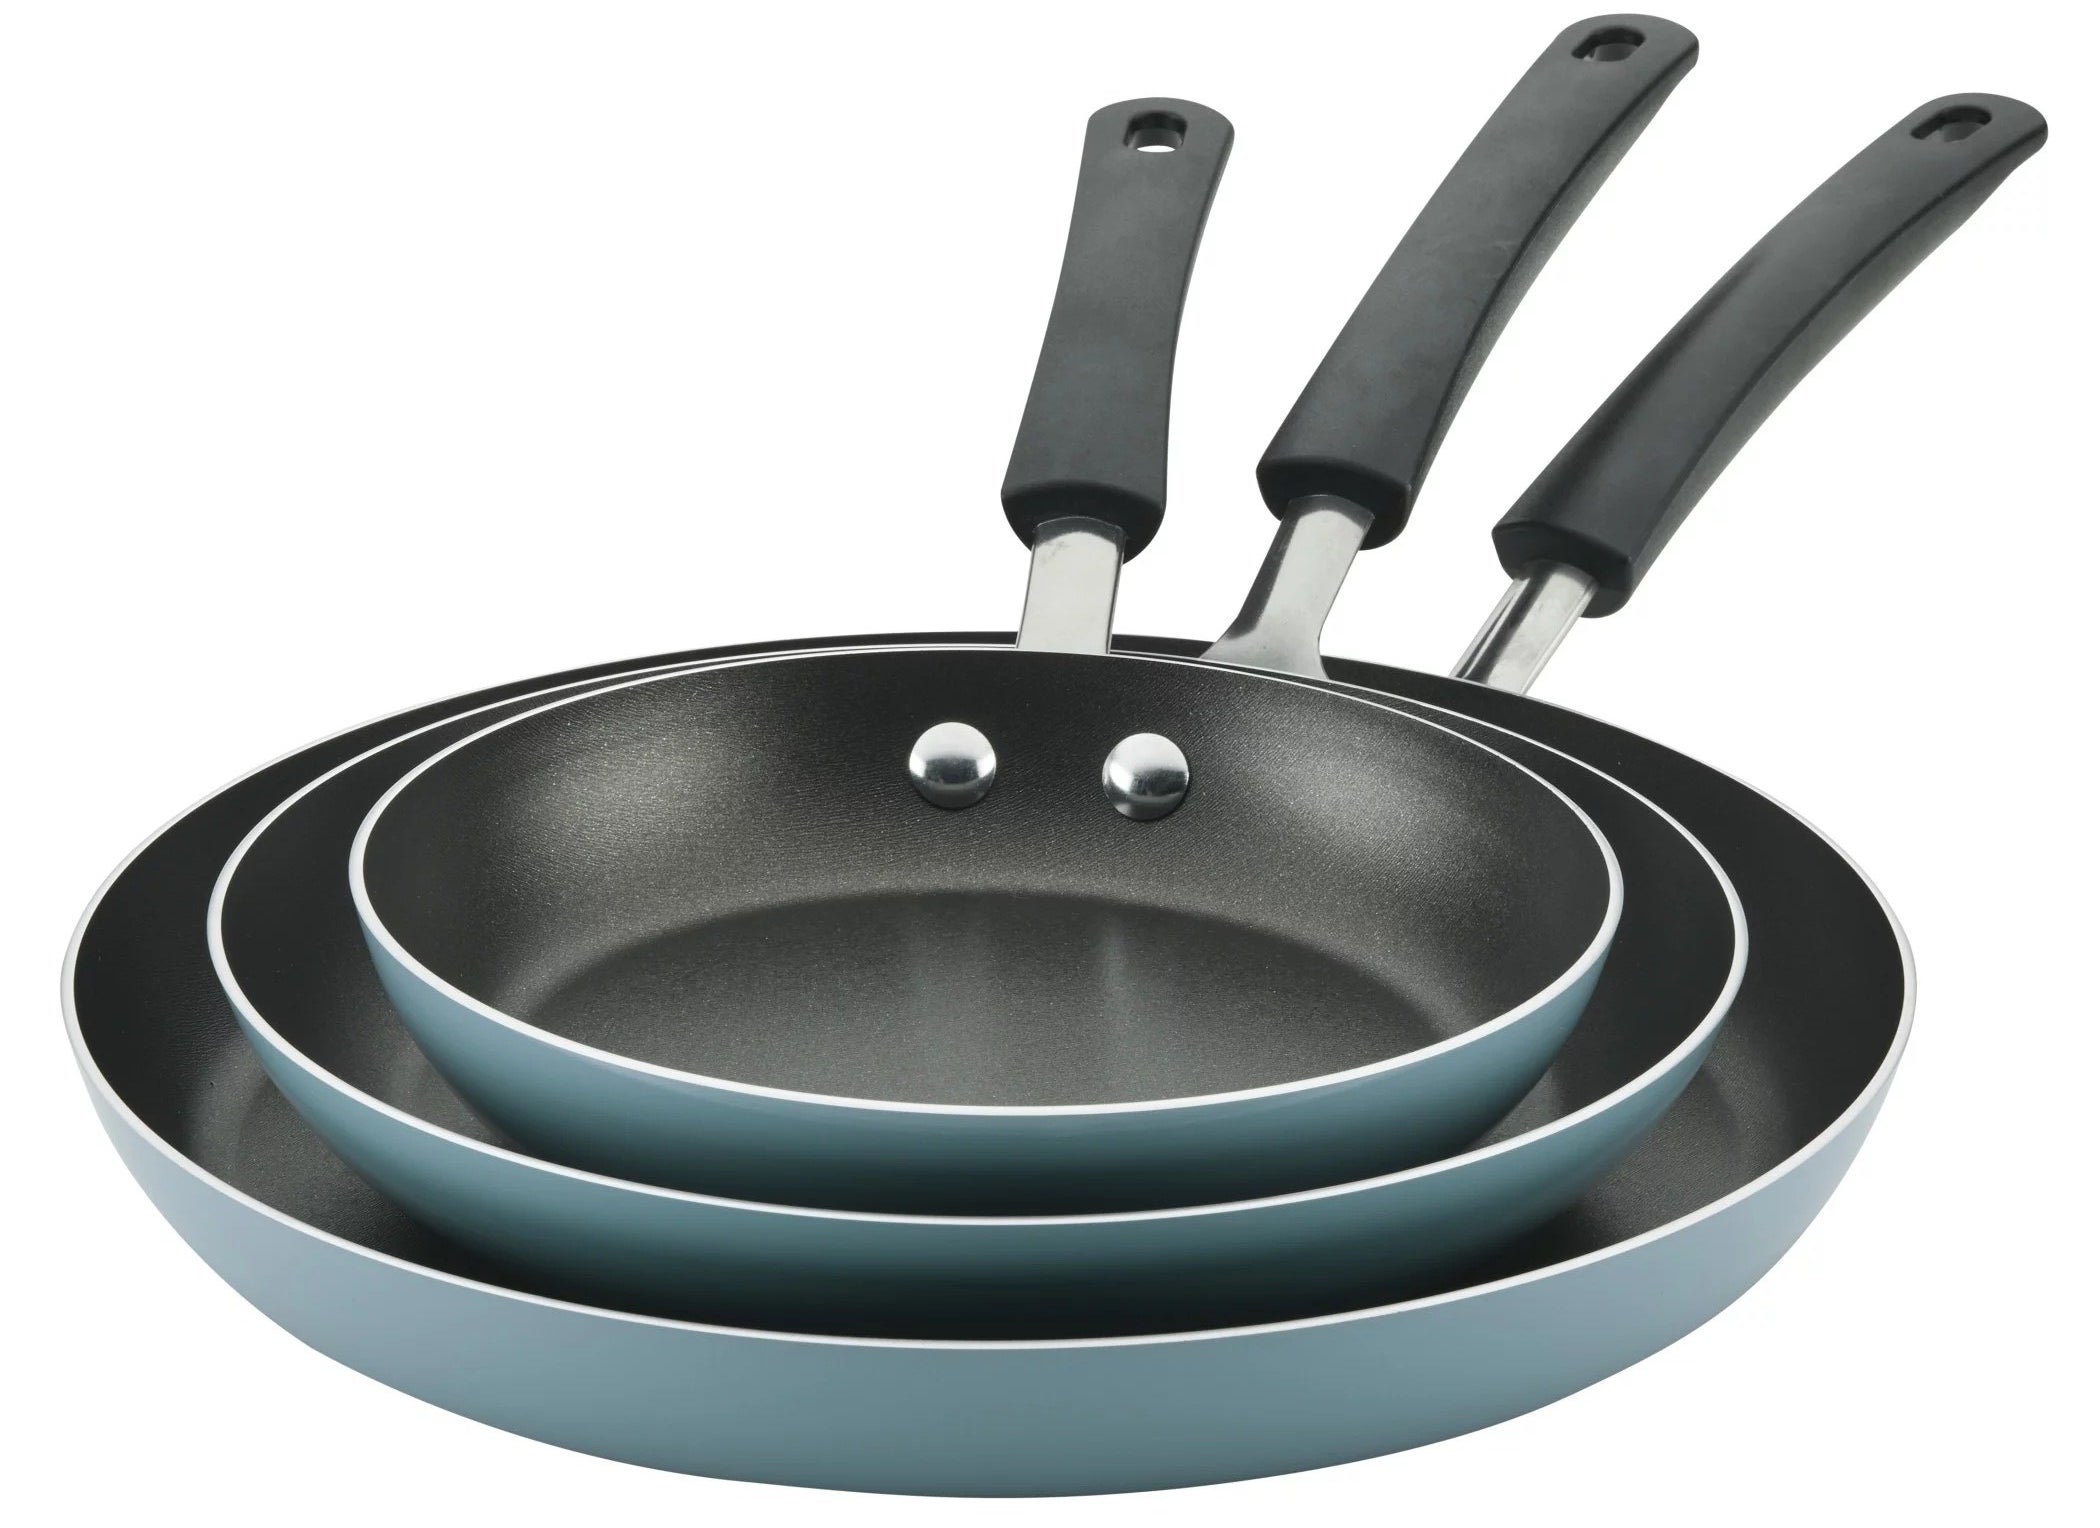 a three-piece set of blue and black nonstick frying pans